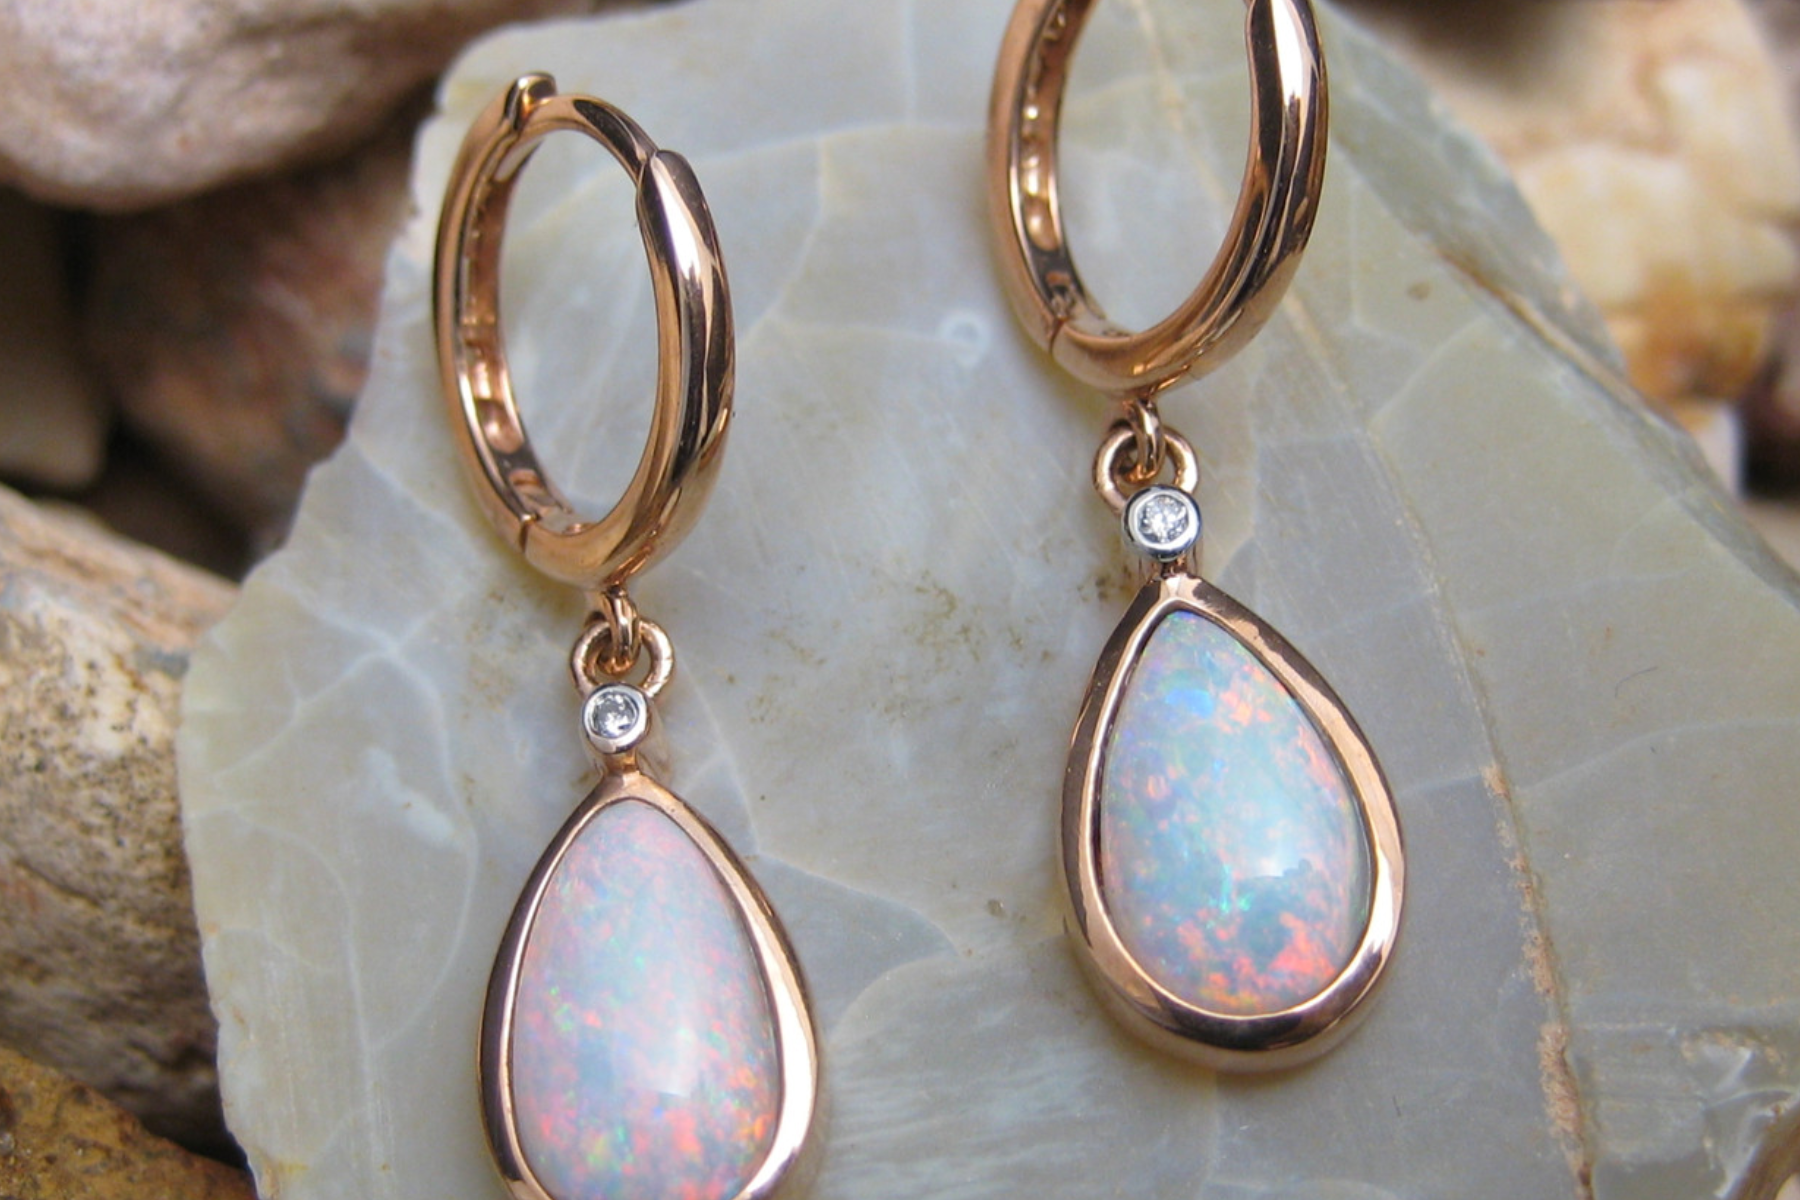 Opal Earrings - Styles, Care, And More